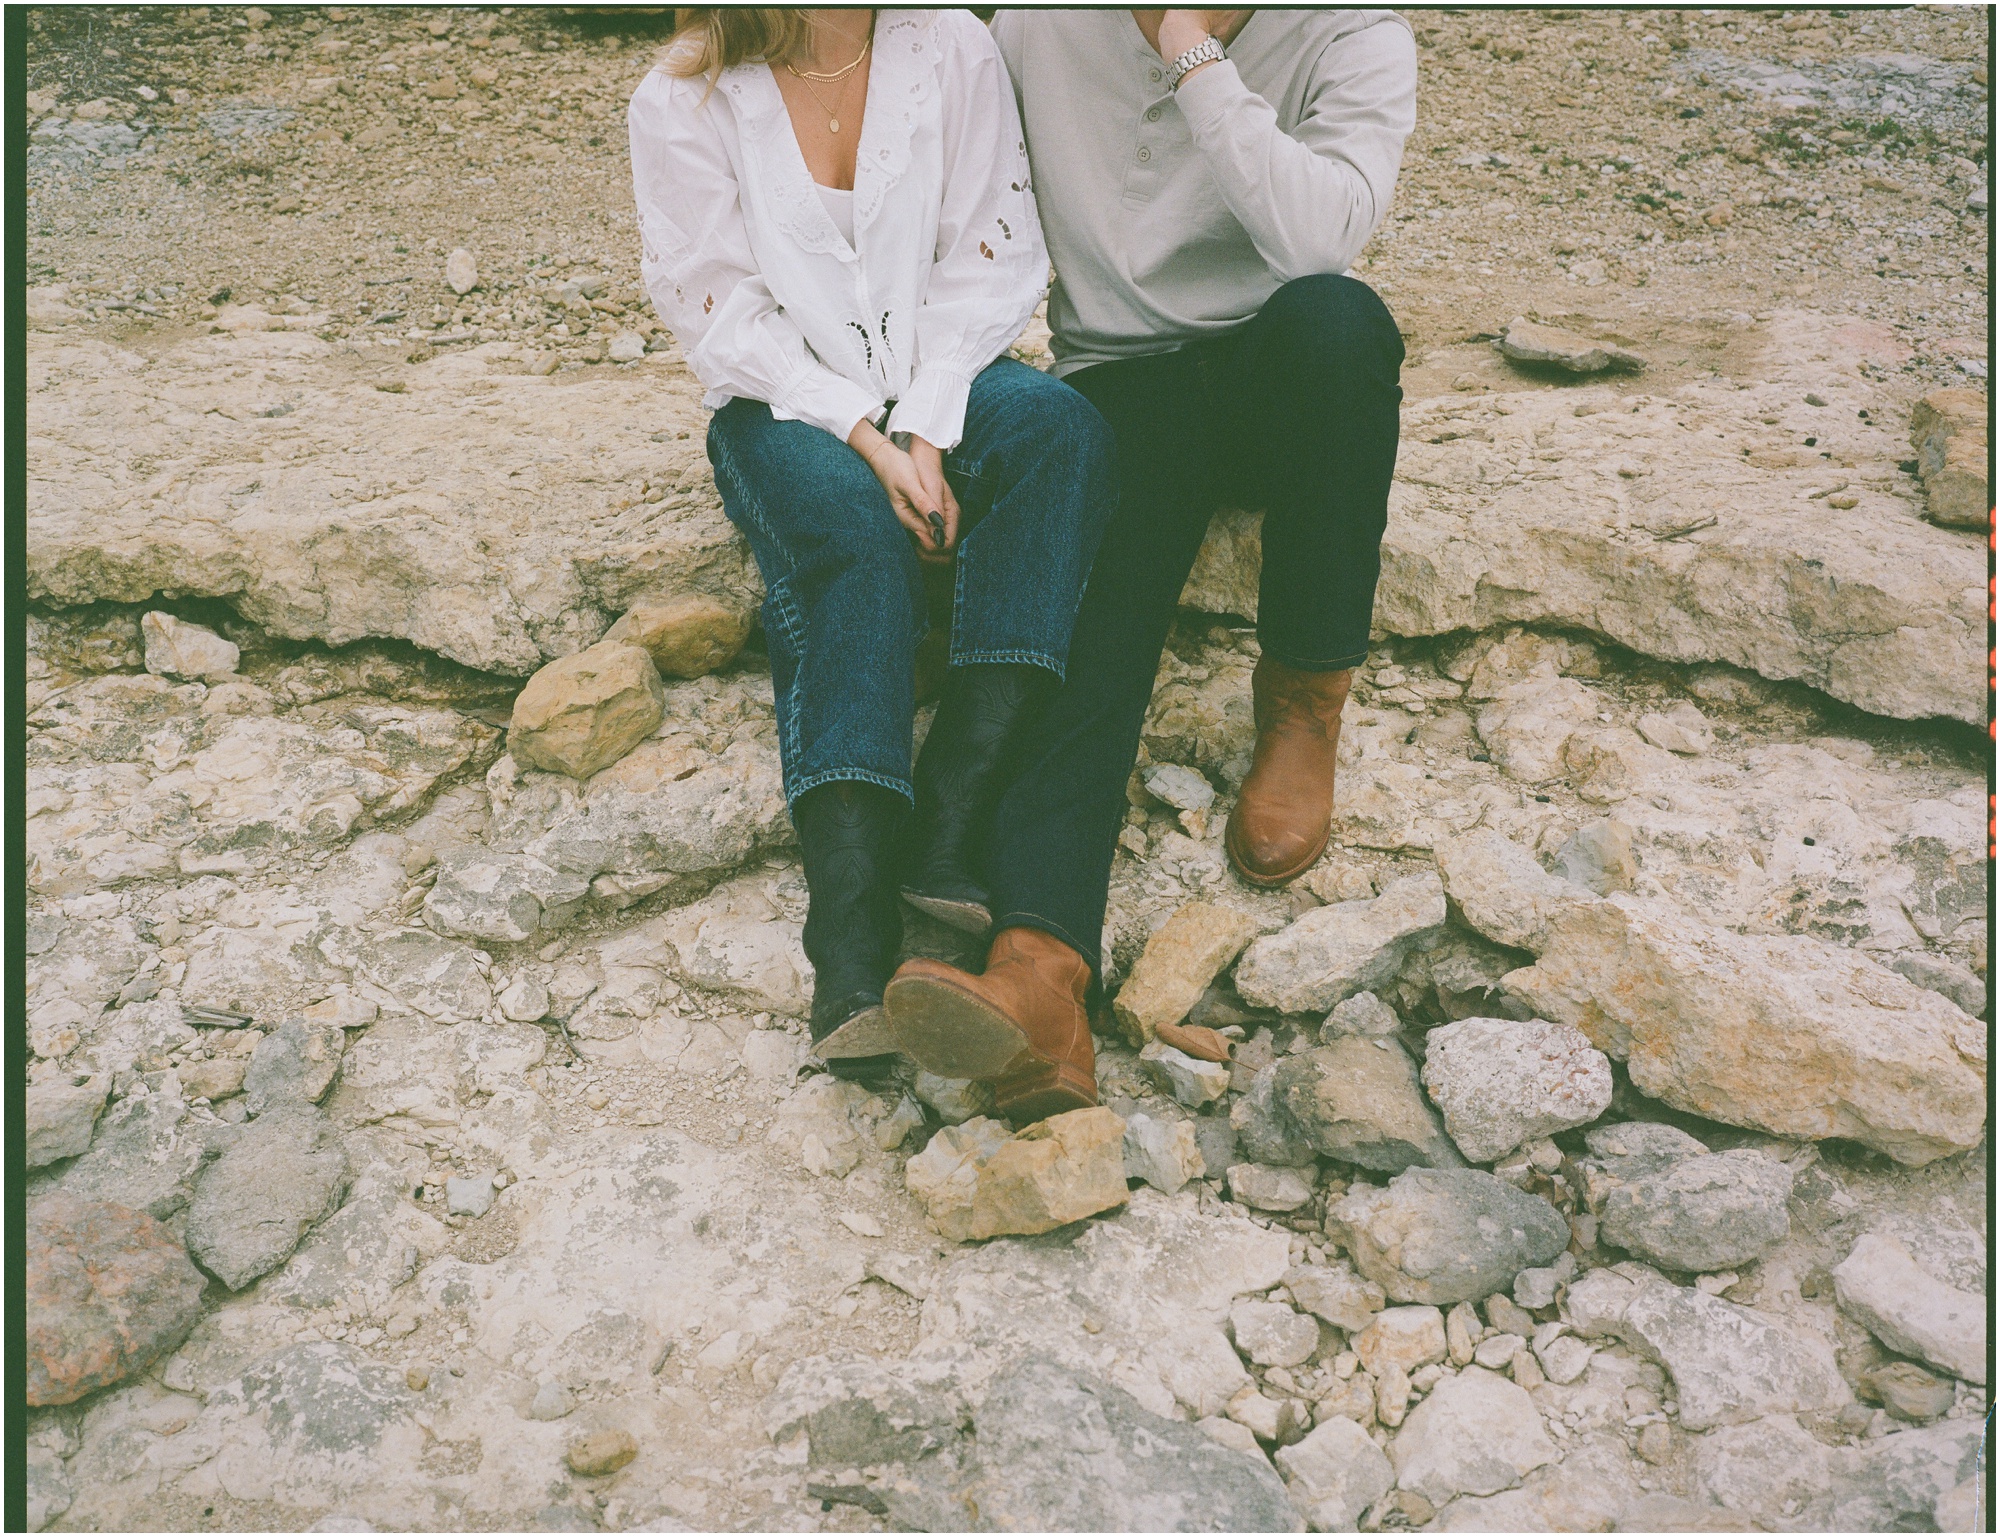 couple sitting together in tecovas boots on rocks in fort worth texas engagement session on 120mm film